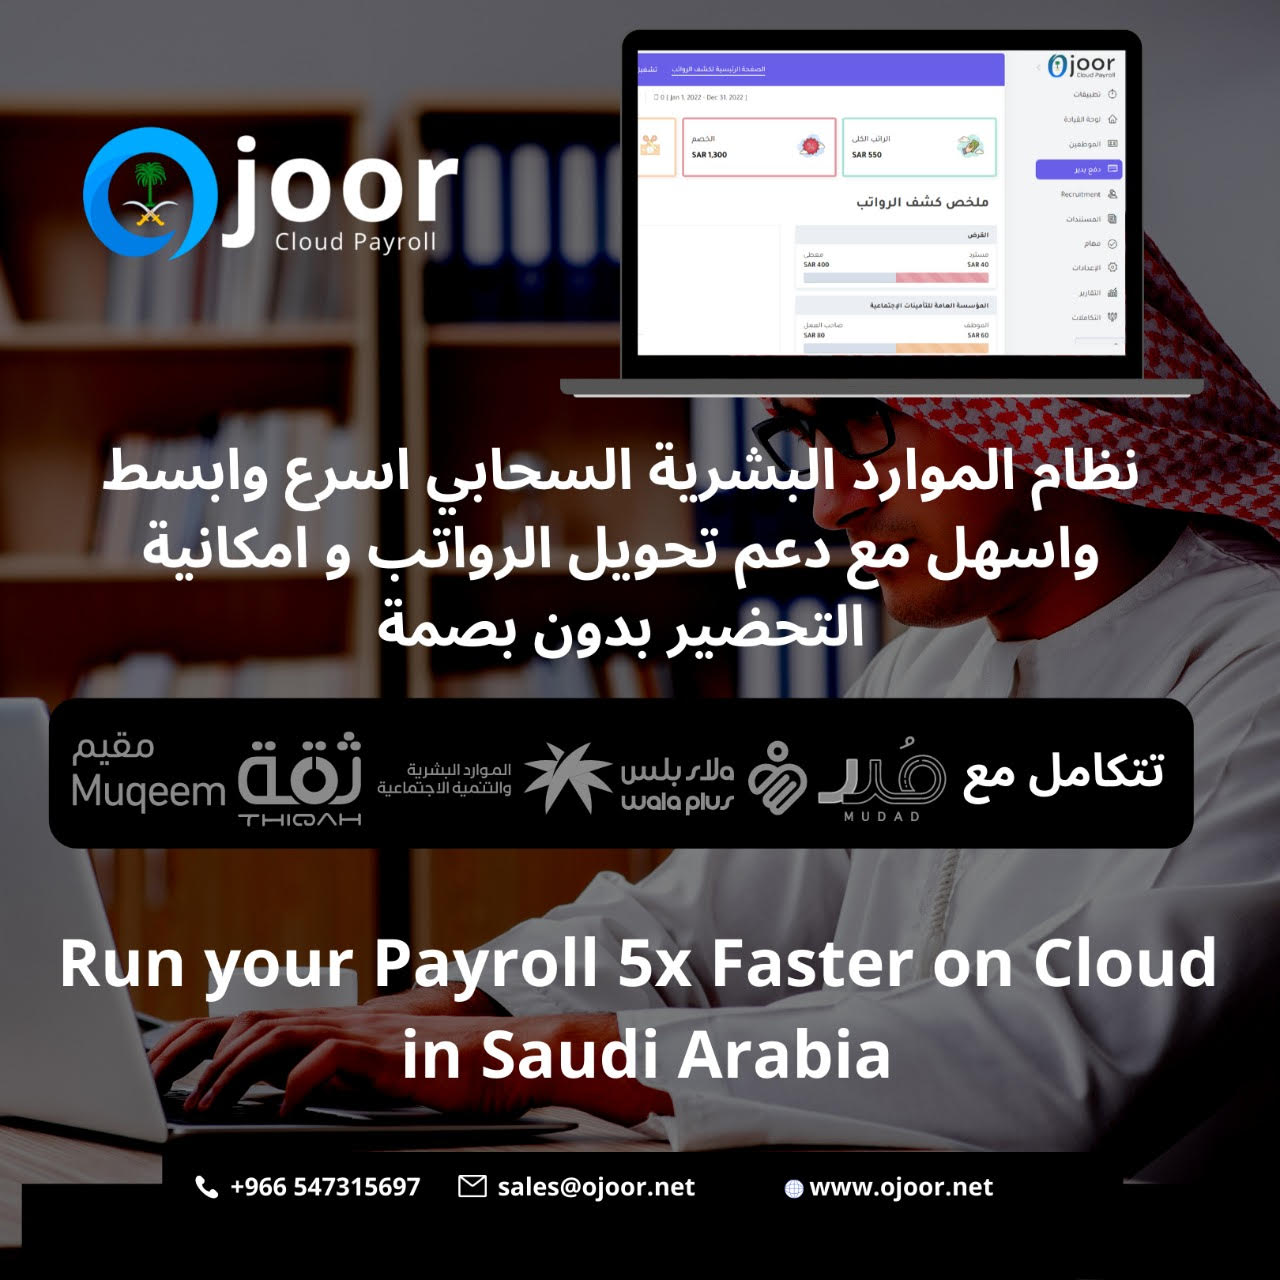 What are the key benefits of management in Payroll Software in Saudi?